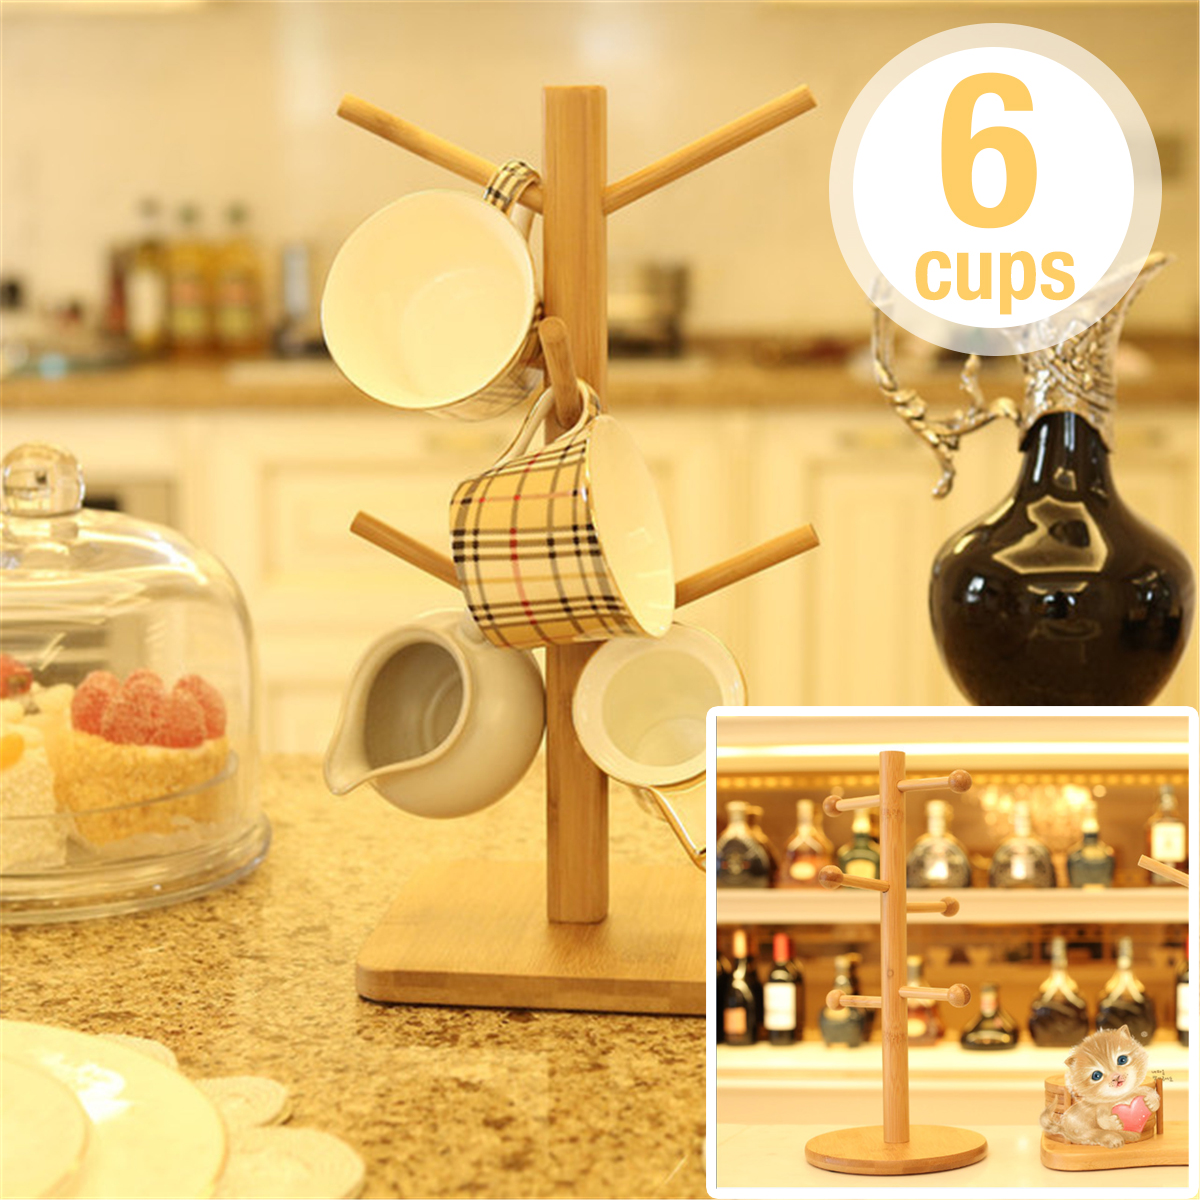 Wooden-Cup-Holder-Teacup-Mug-Drain-Rack-Stand-6-Cups-Drain-Cup-Hanging-Stand-Coffee-Cup-Display-Stan-1777089-1